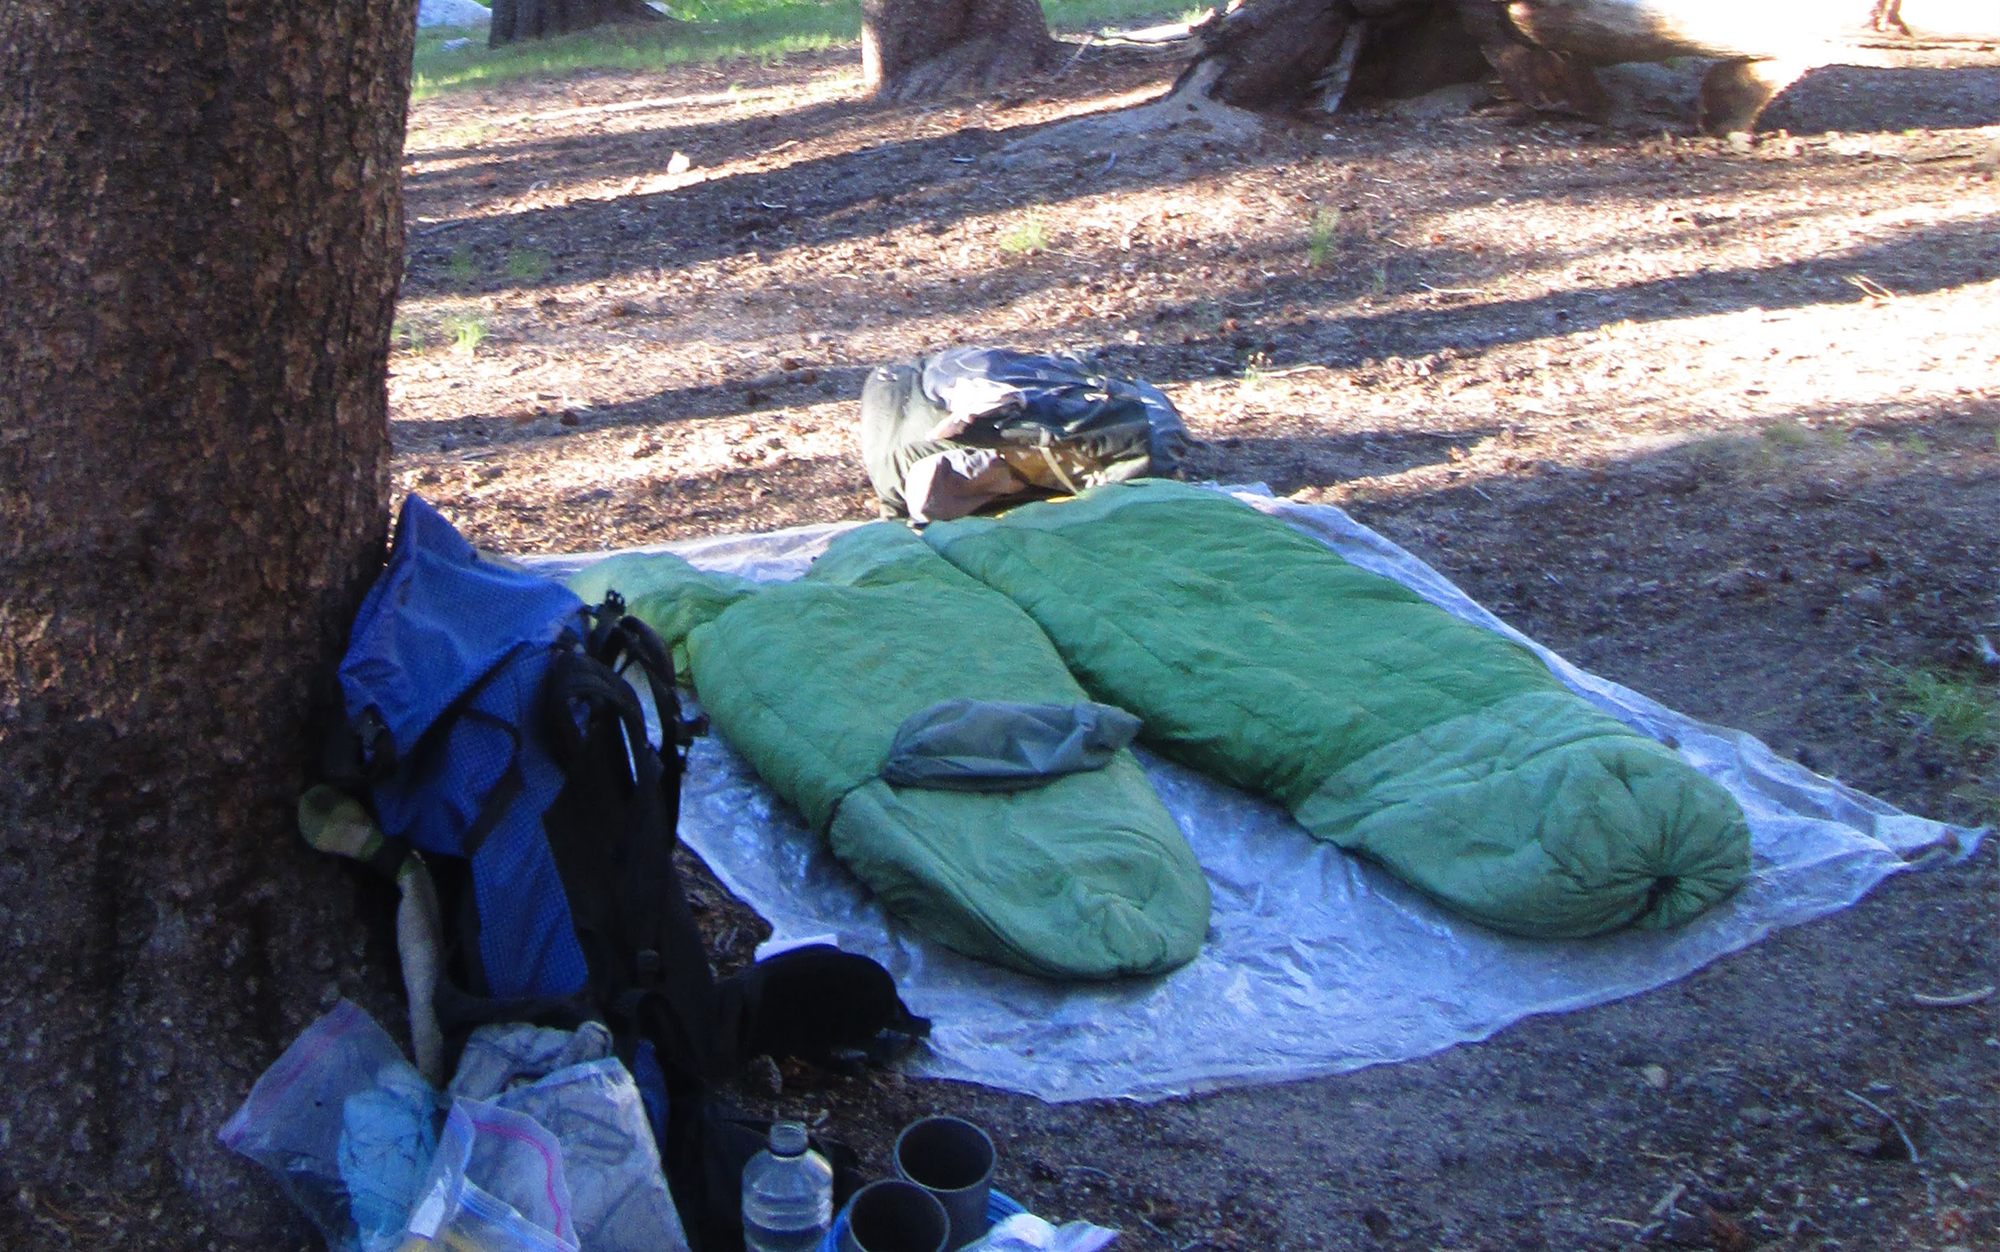 One of my family’s first set of Enlightened Equipment quilts, out on the Pacific Crest Trail in 2014.